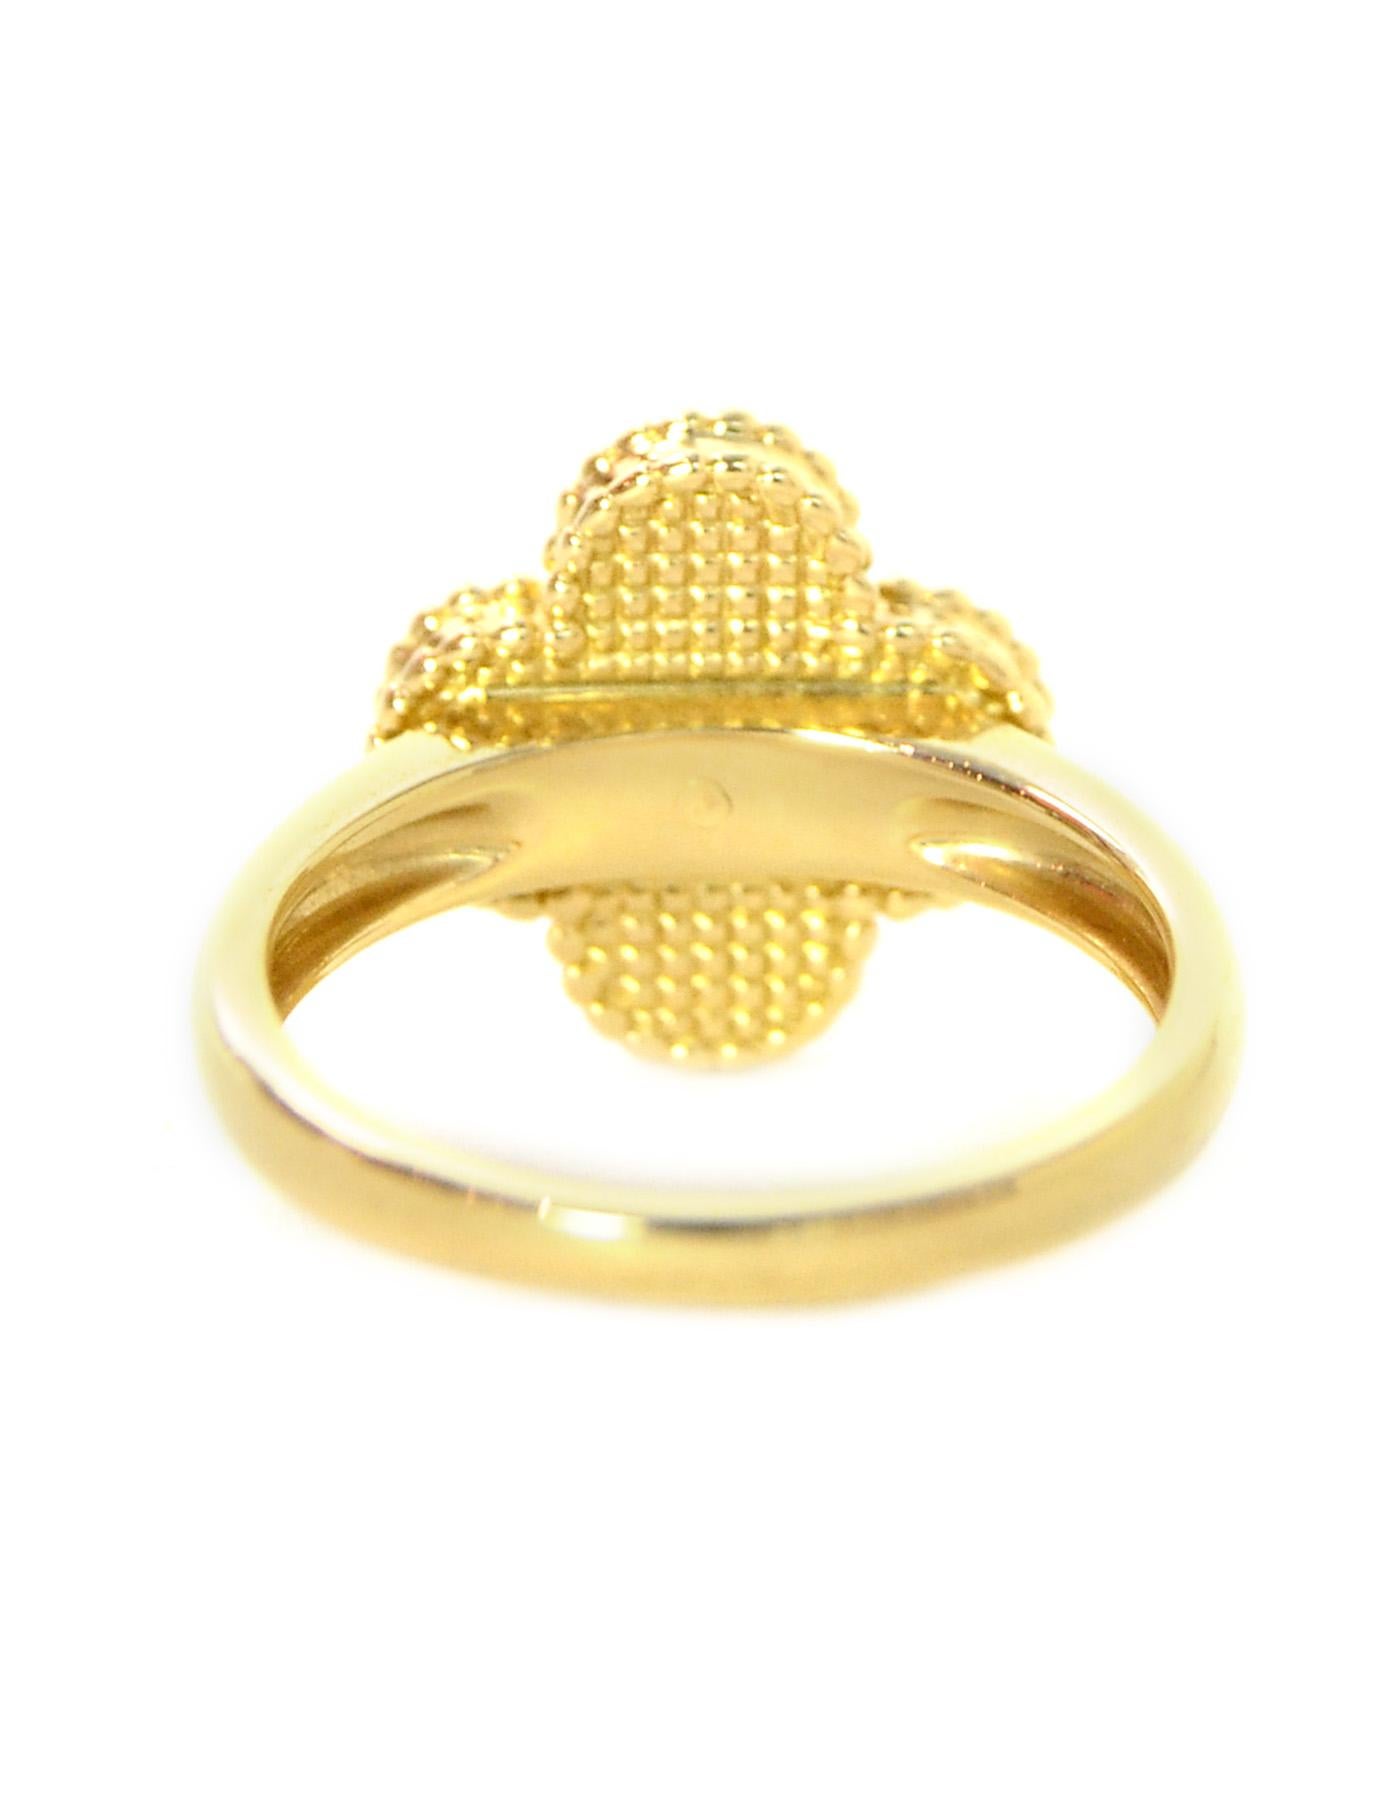 Van Cleef & Arpels Vintage Alhambra Ring
Features textured yellow gold Alhambra clover lead with .06 carat round diamond

Year of Production: 2018
Color: Gold
Materials: 18k yellow gold and diamond
Stamps: VCA Au750 54 JA050351
Includes: Van Cleef